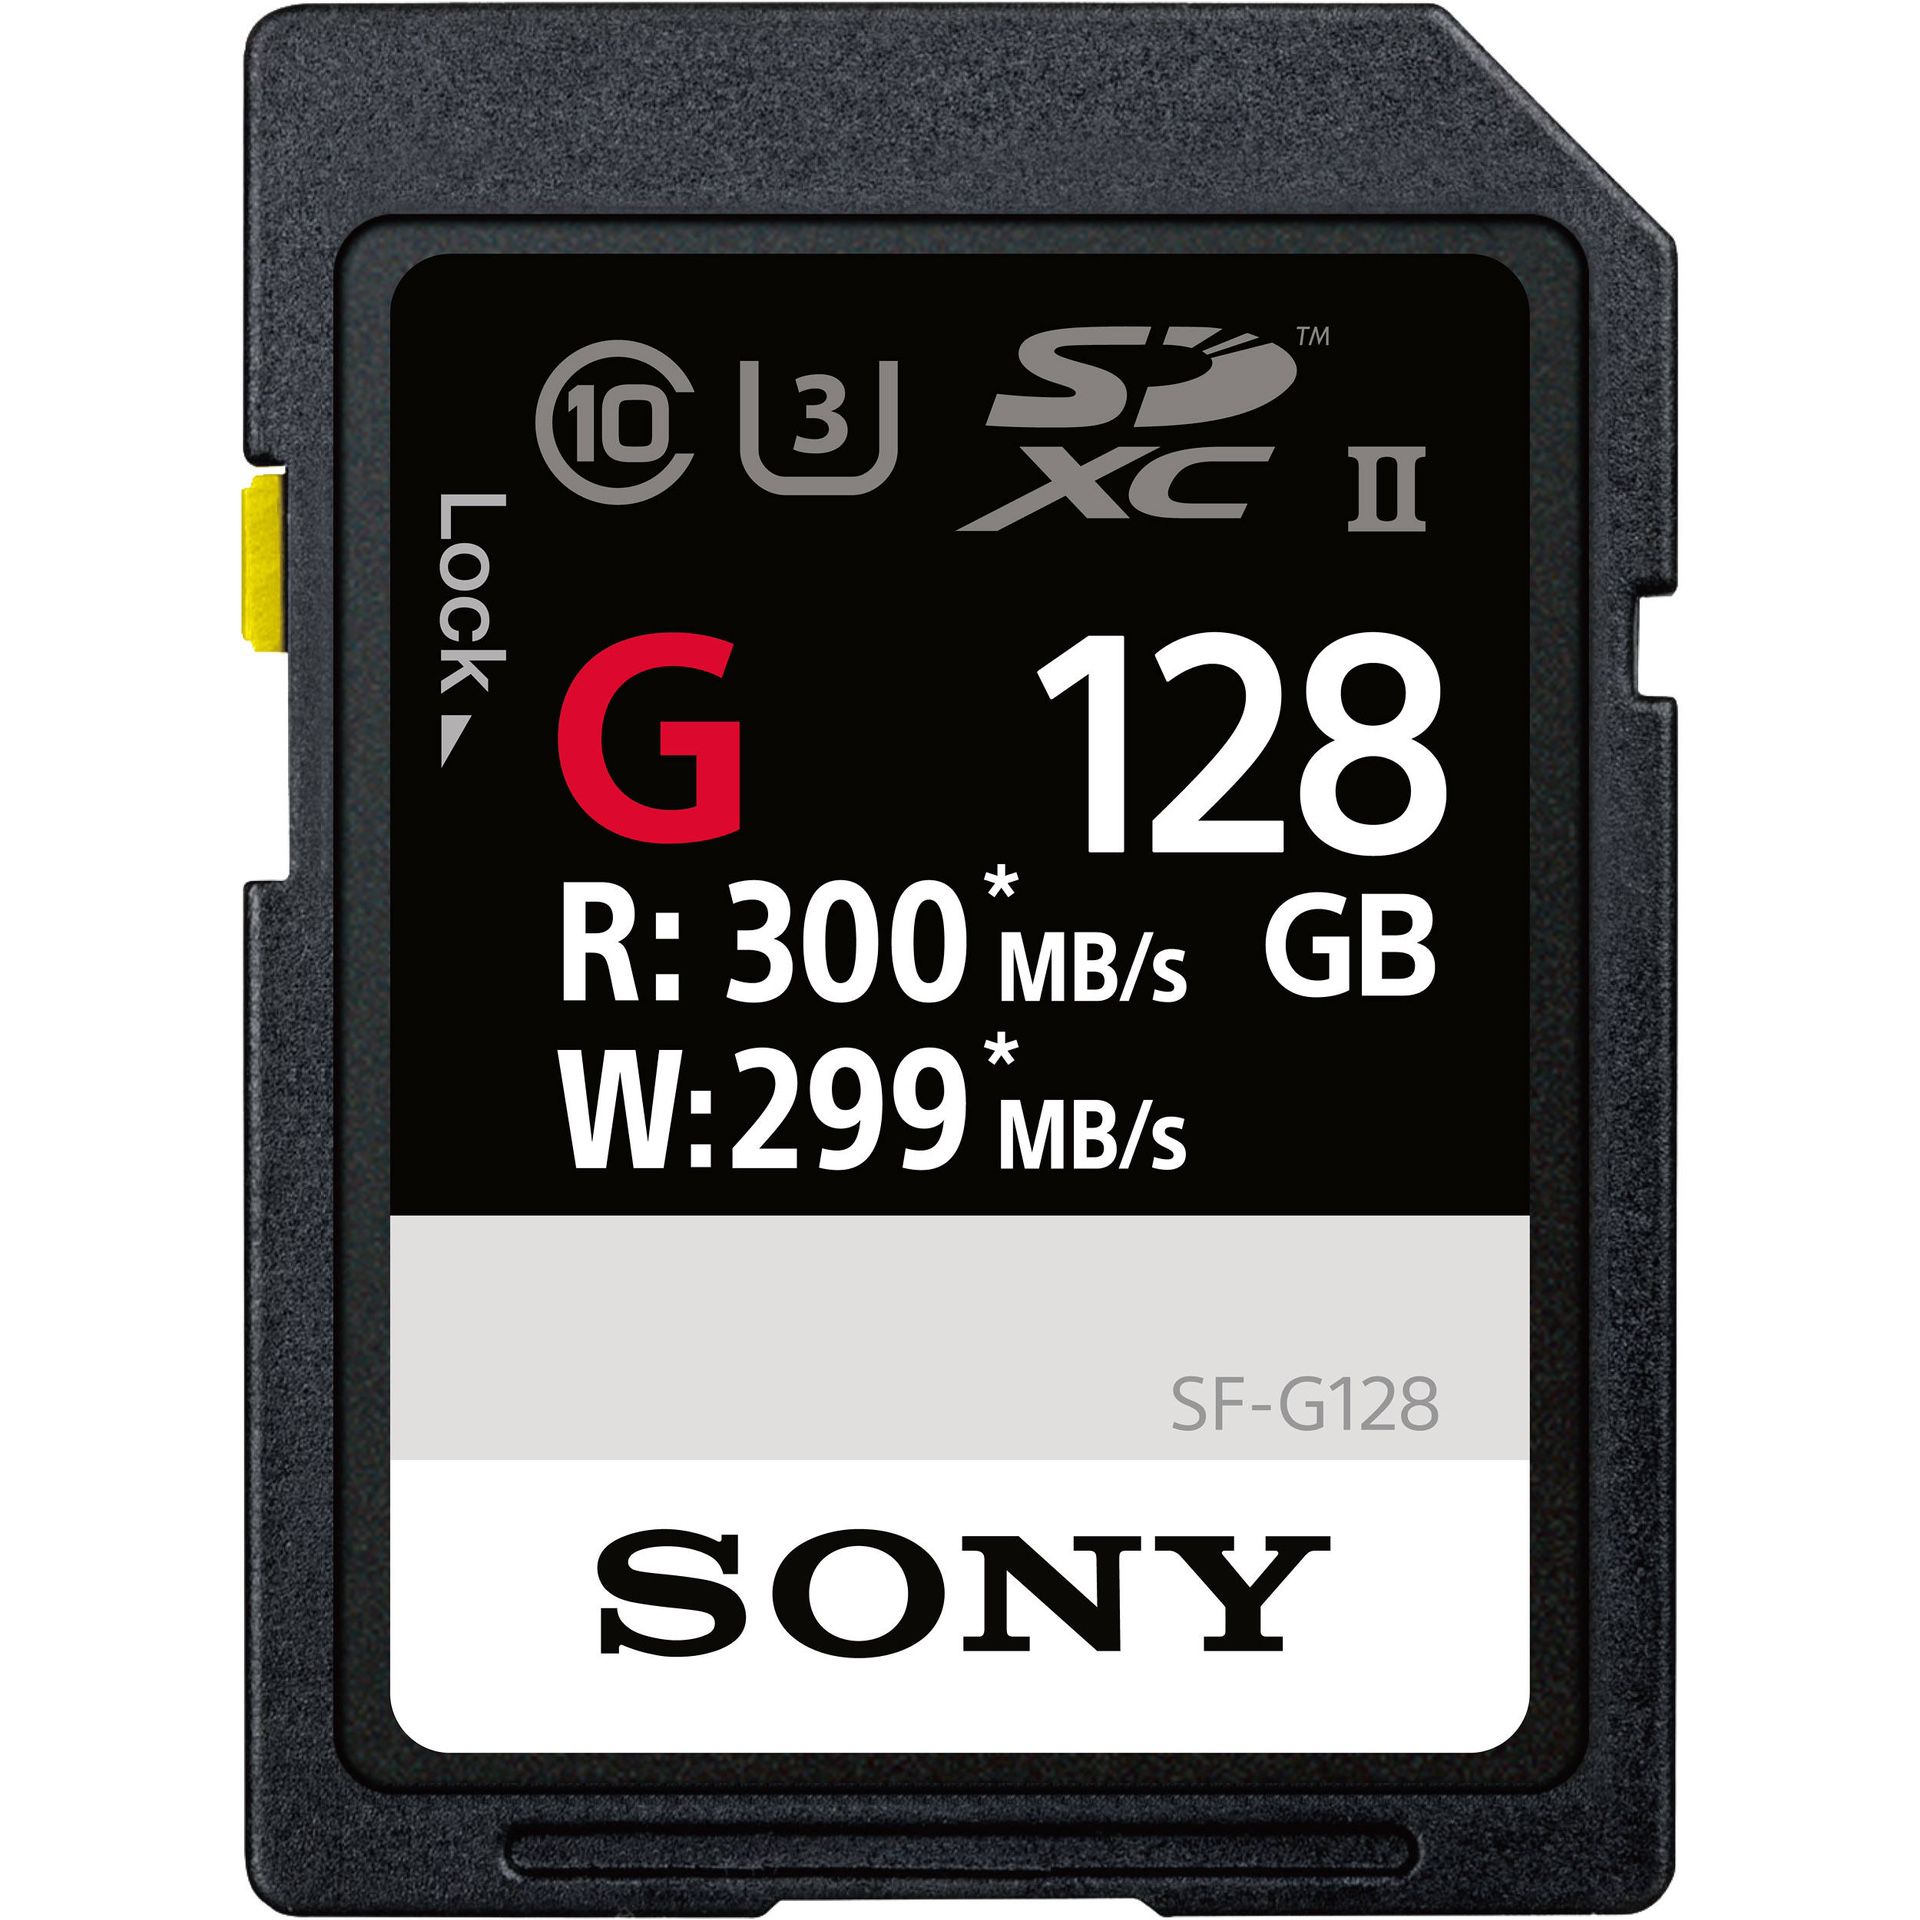 New Sony SF-G128/T1 High Performance 128GB SDXC UHS-II Class 10 U3 Memory Card with Blazing Fast Read Speed Up to 300MB/S & Write Speeds Up to 299MB/S